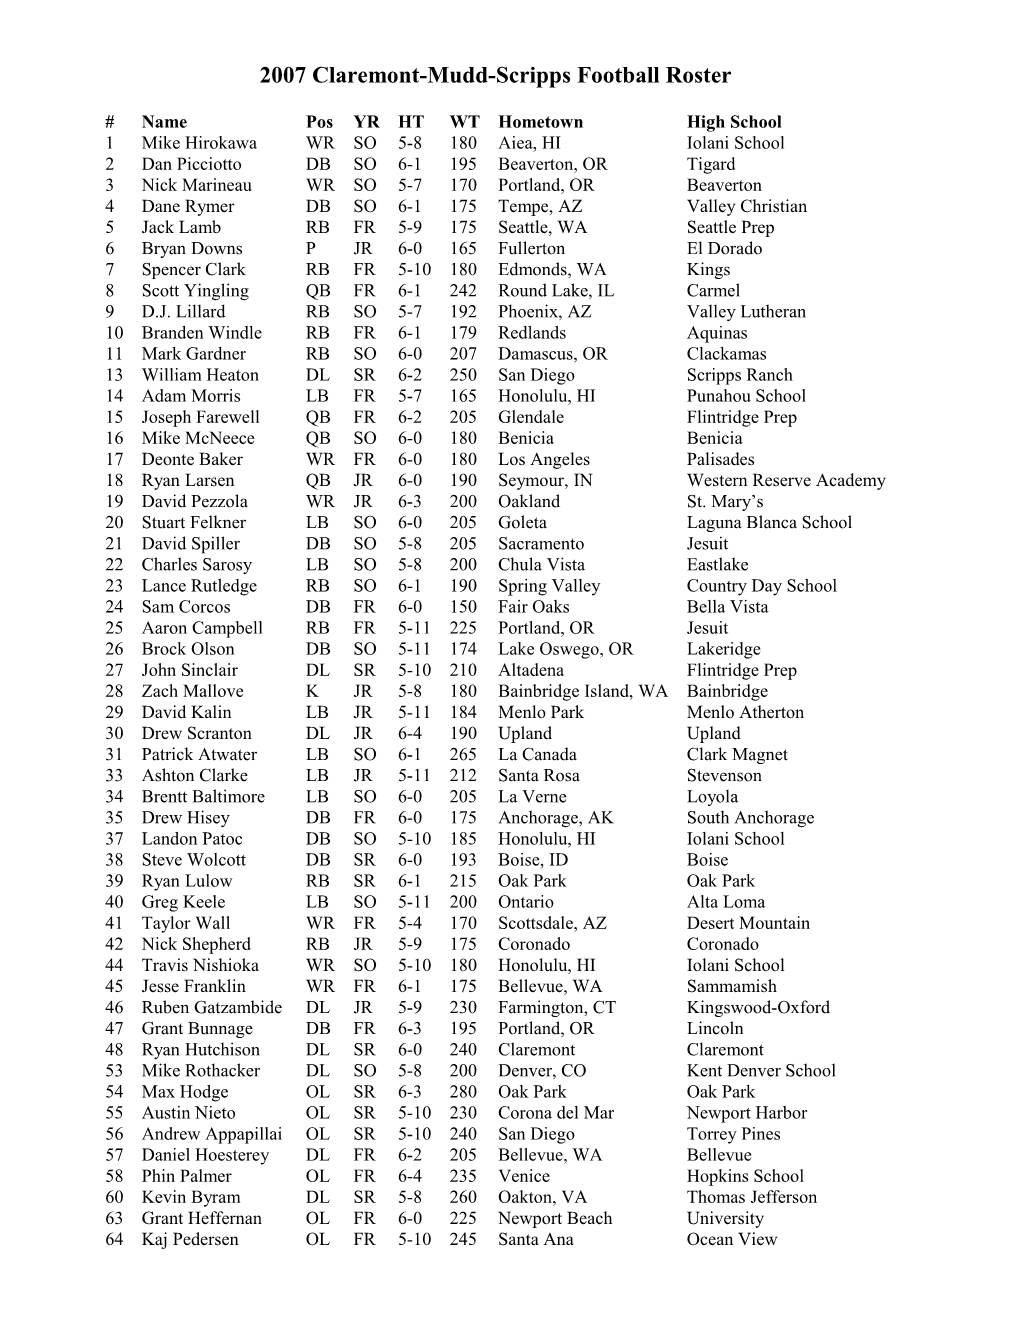 2006 Claremont-Mudd-Scripps Numerical Football Roster